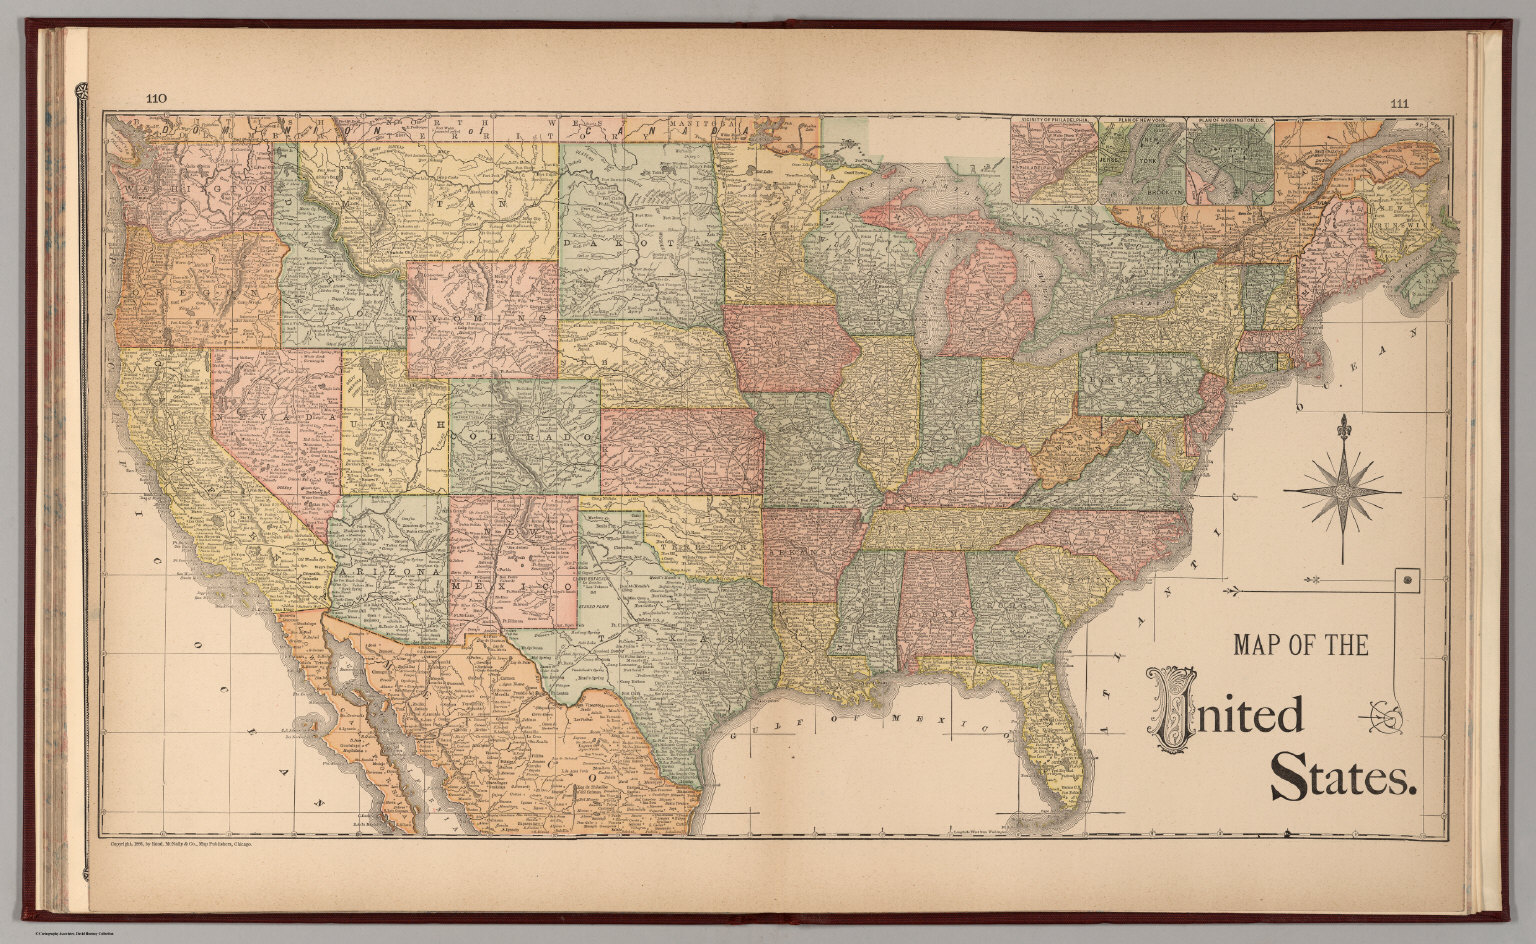 United States David Rumsey Historical Map Collection 3569